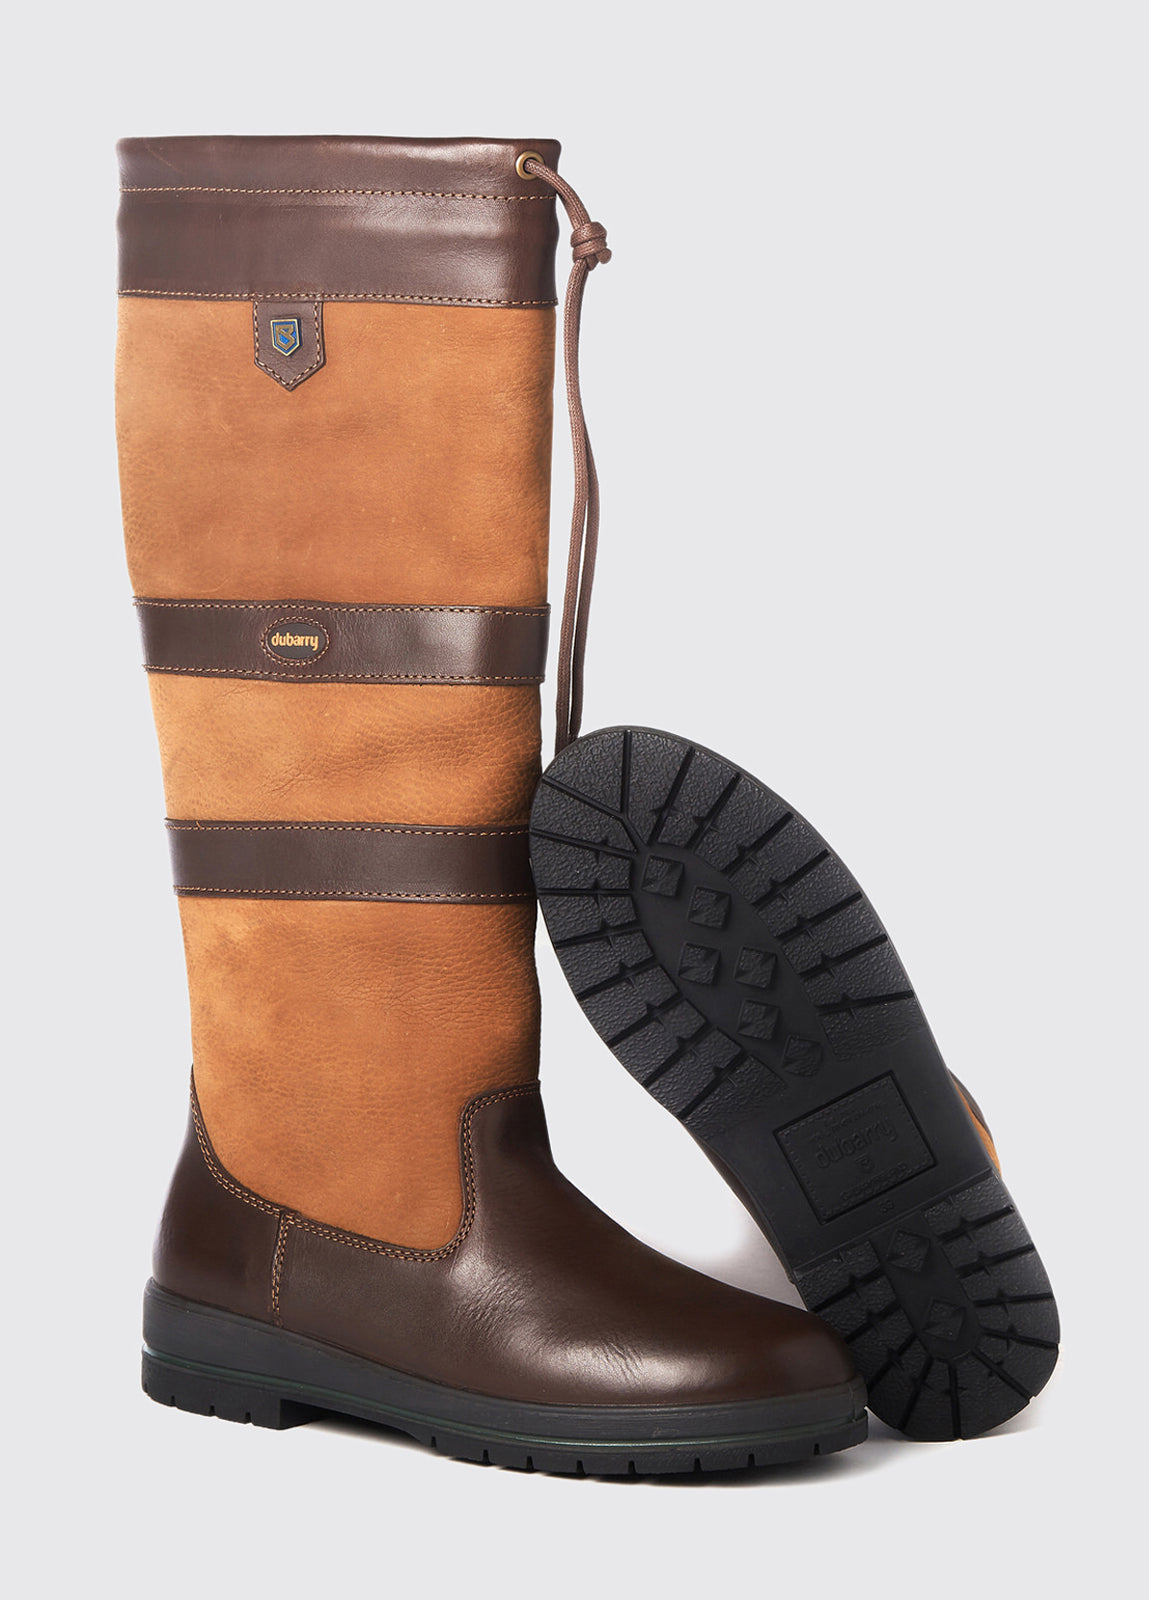 Dubarry Galway Country Boot Brown